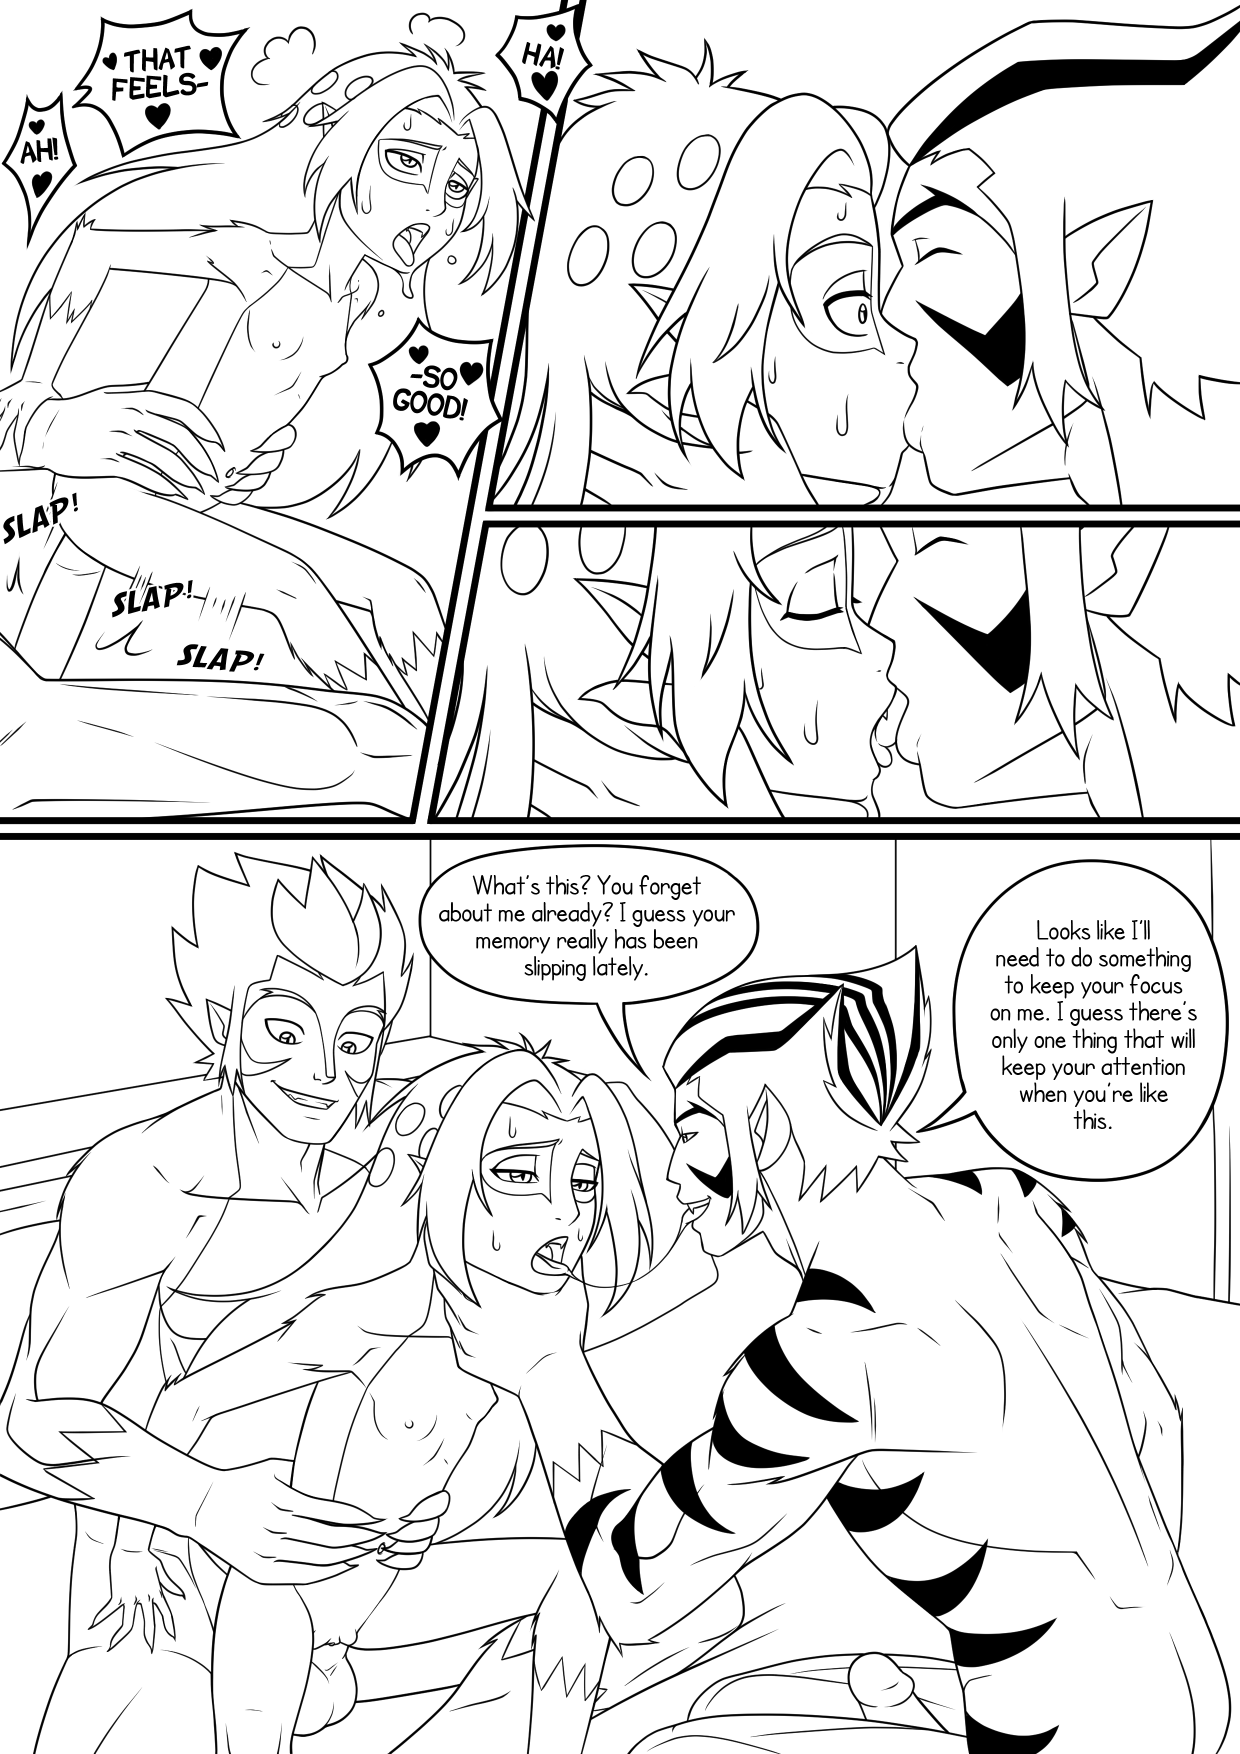 Dream Team Page 05 Lines